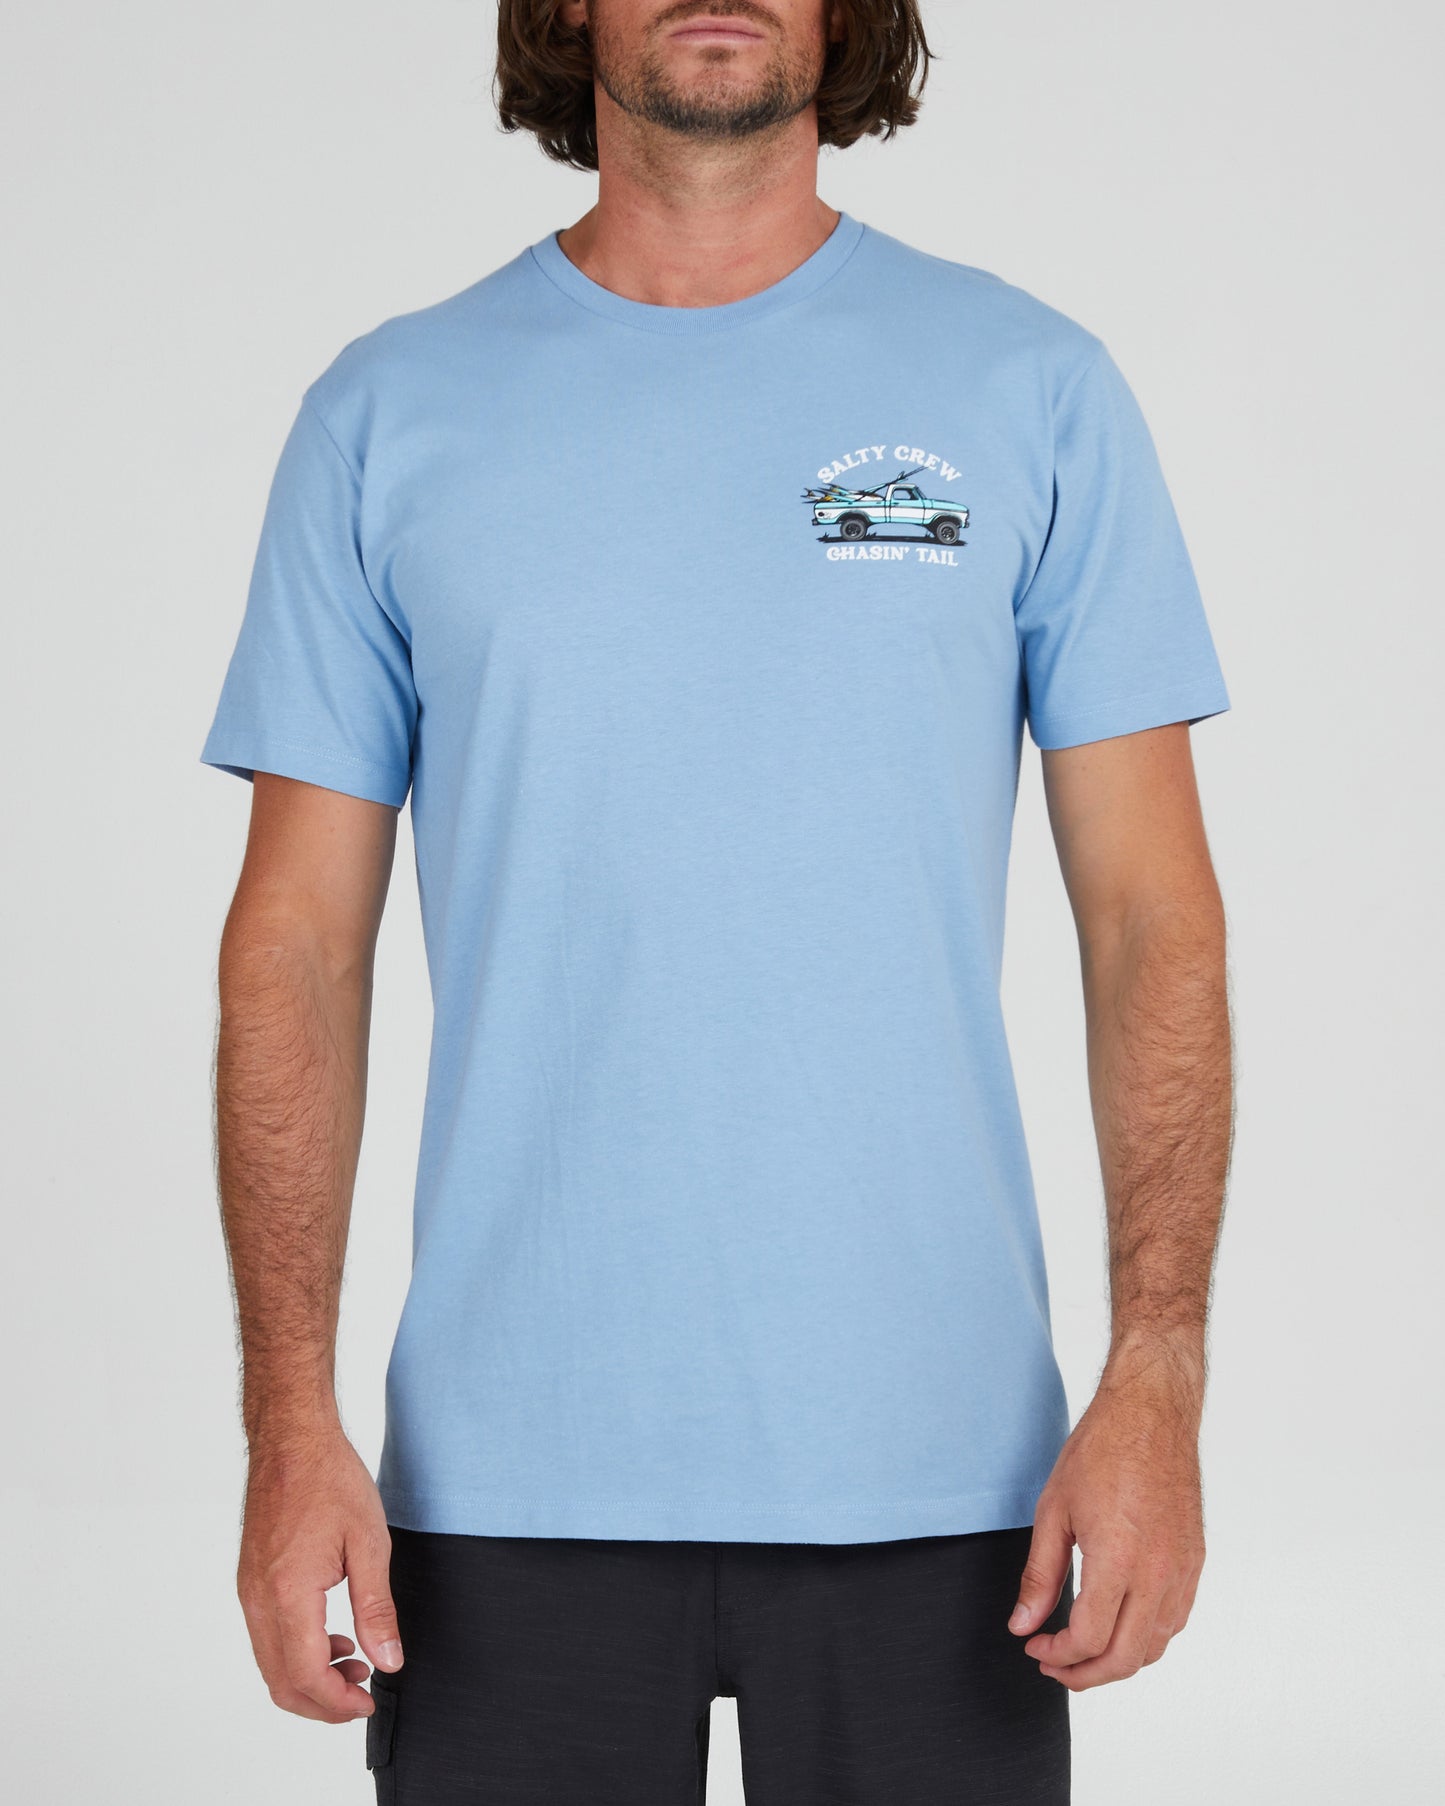 On body front of the Off Road Marine Blue S/S Premium Tee